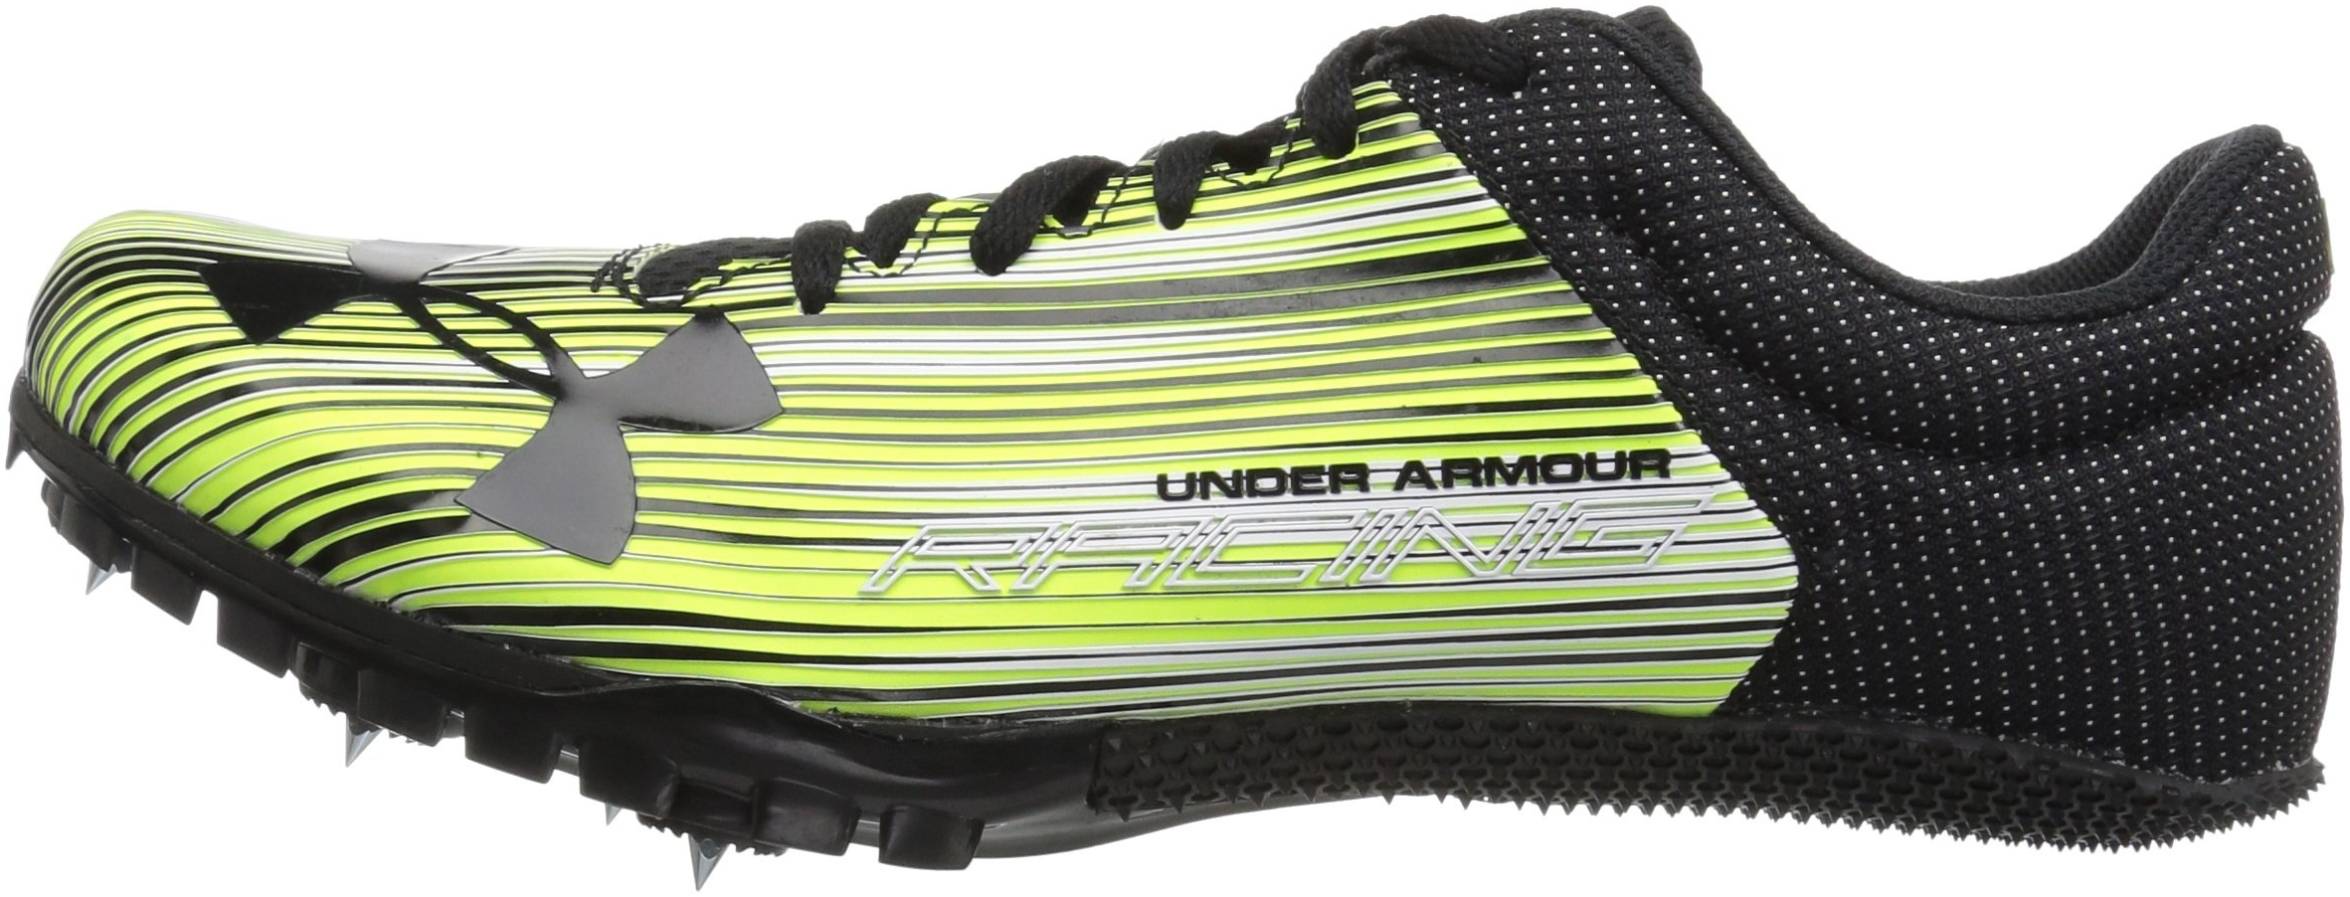 under armour shoes tracking